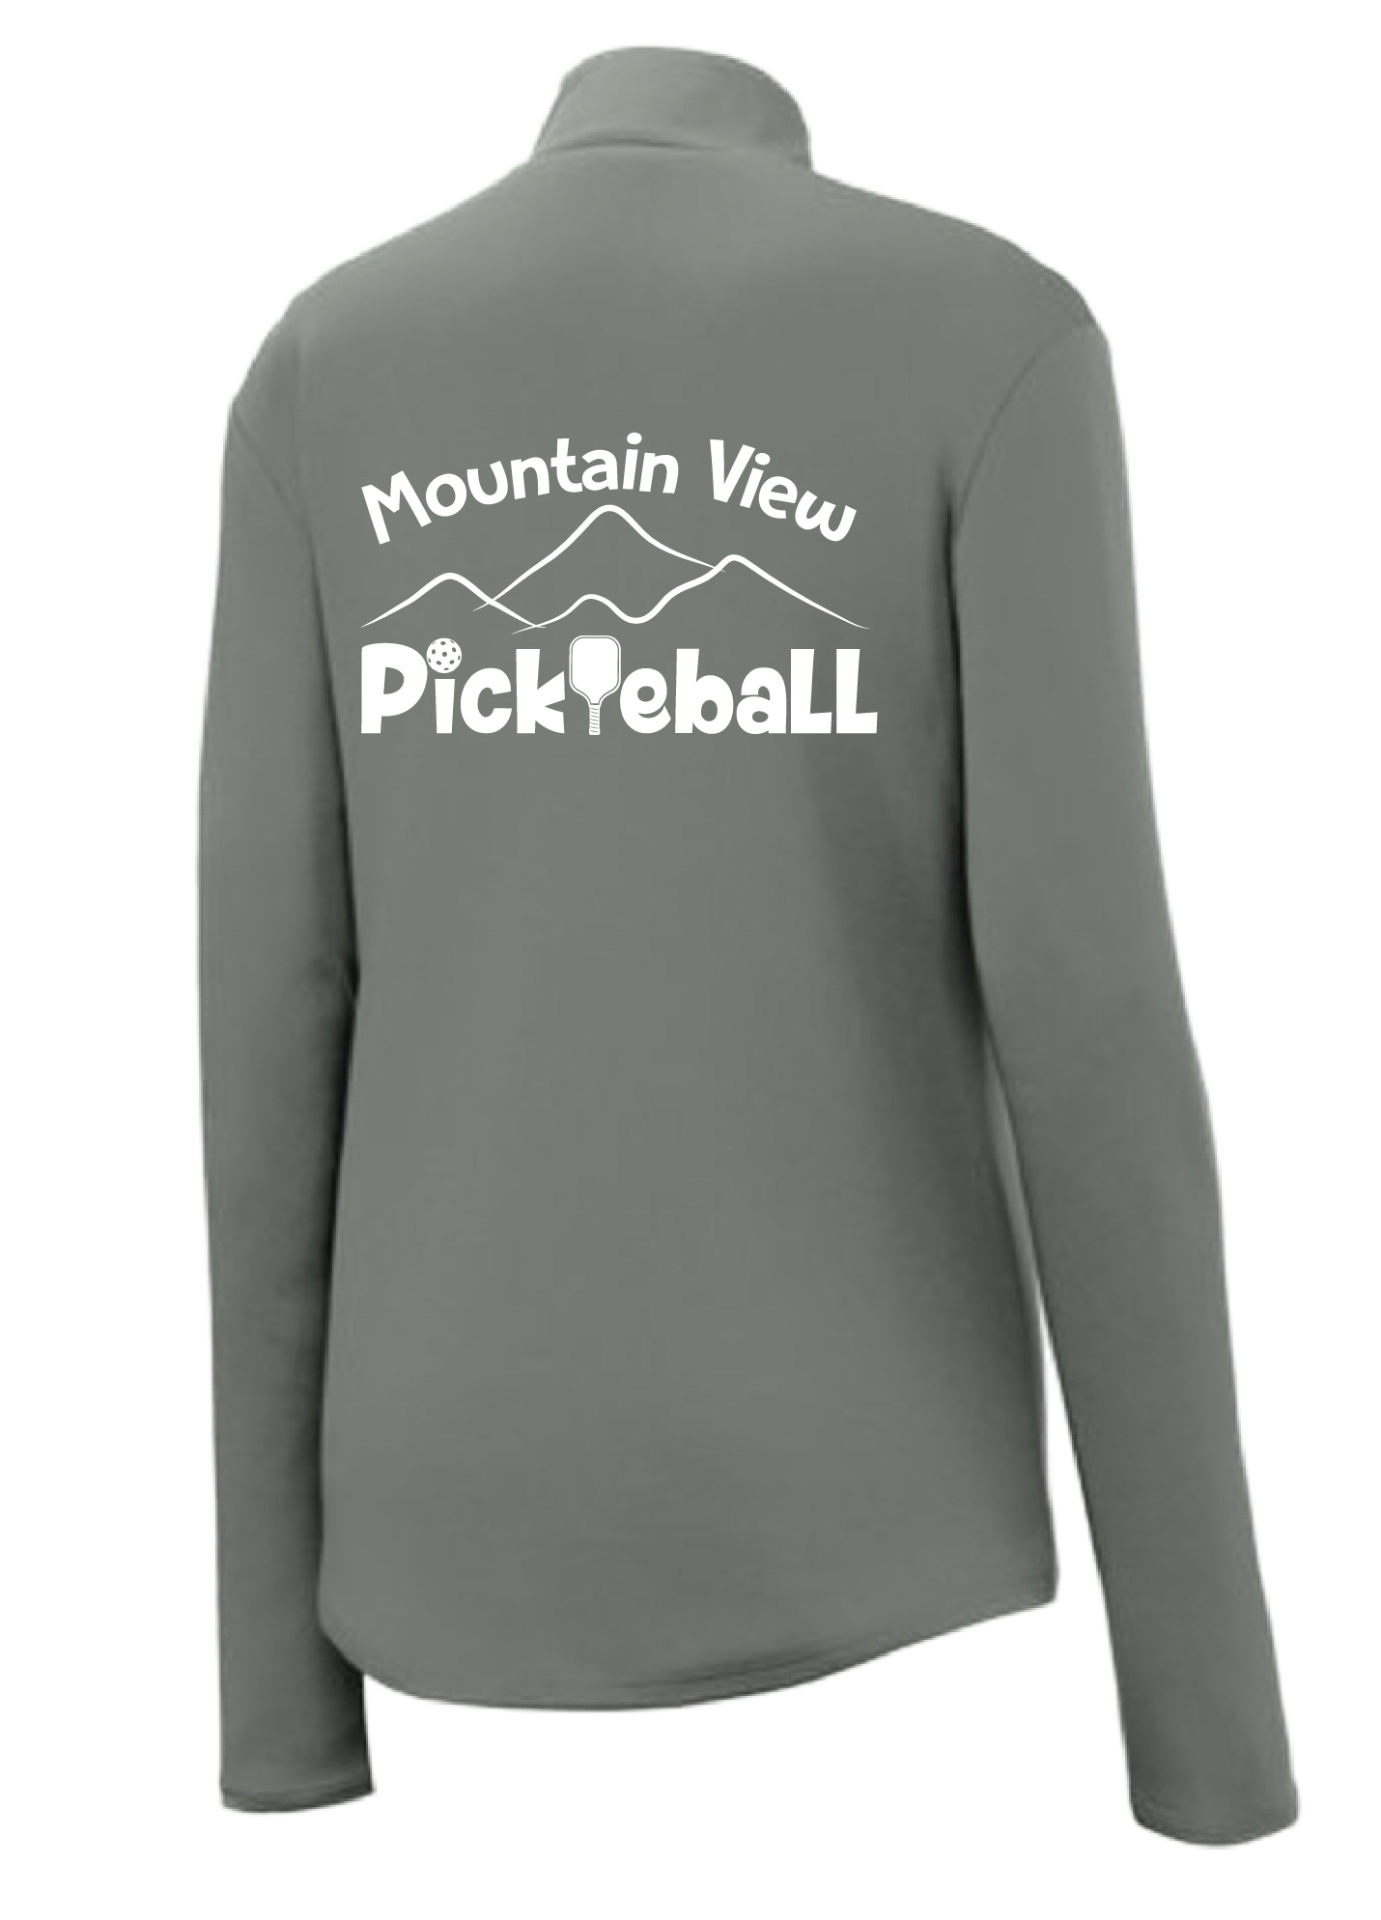 Pickleball Design: Mountain View Pickleball Club  Women's 1/4-Zip Pullover:  Princess seams and Drop tail hem.  Turn up the volume in this Women's shirt with its perfect mix of softness and attitude. Material is ultra-comfortable with moisture wicking properties and tri-blend softness. PosiCharge technology locks in color. Highly breathable and lightweight. Versatile enough for wearing year-round.